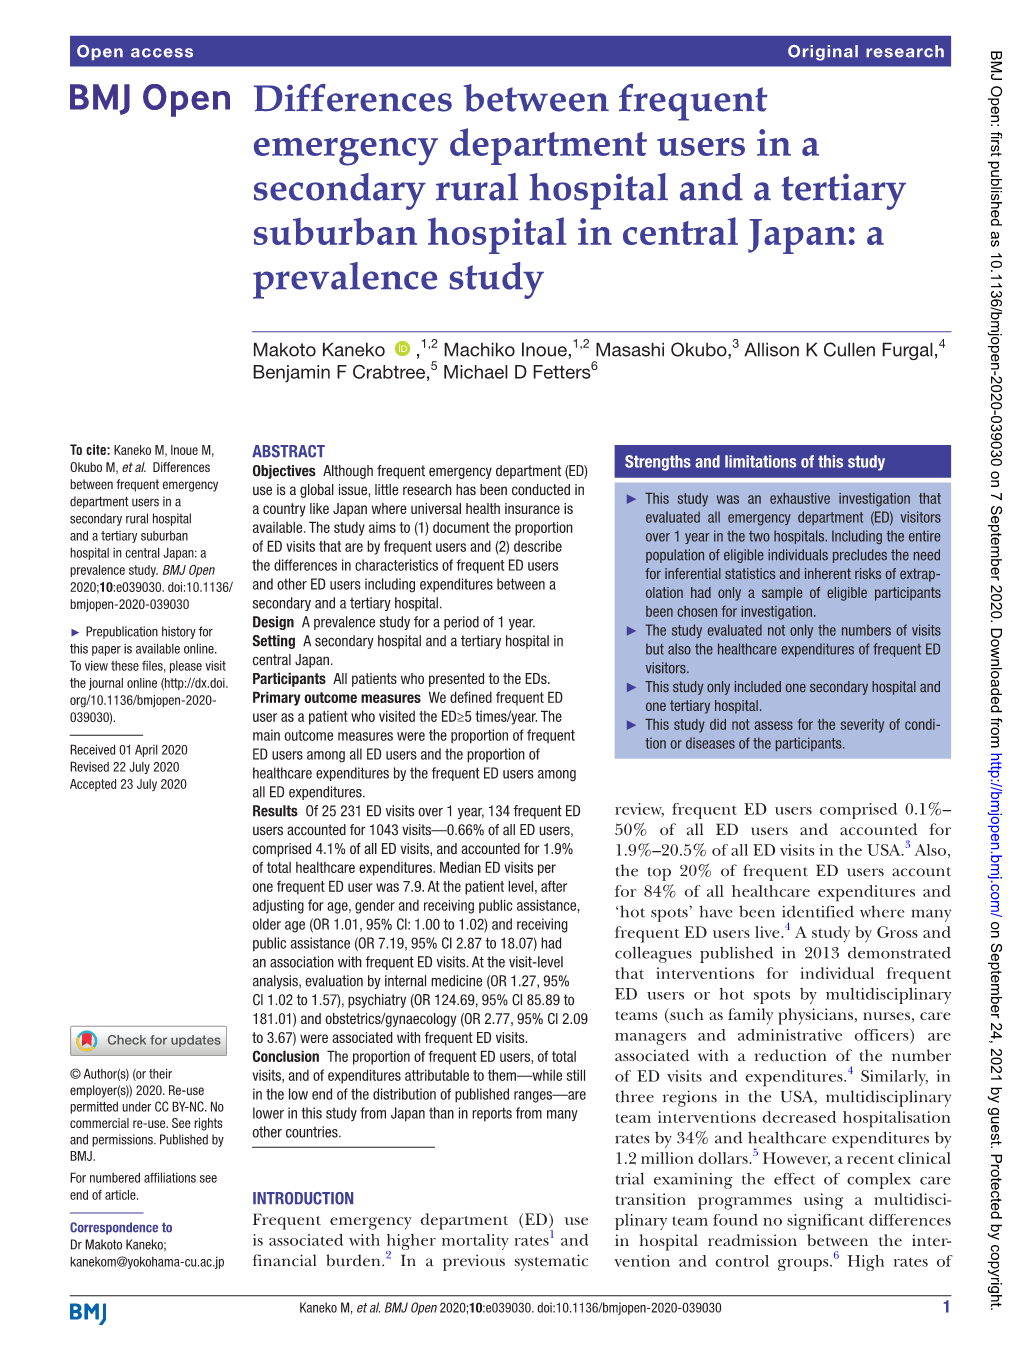 Differences Between Frequent Emergency Department Users in a Secondary Rural Hospital and a Tertiary Suburban Hospital in Central Japan: a Prevalence Study